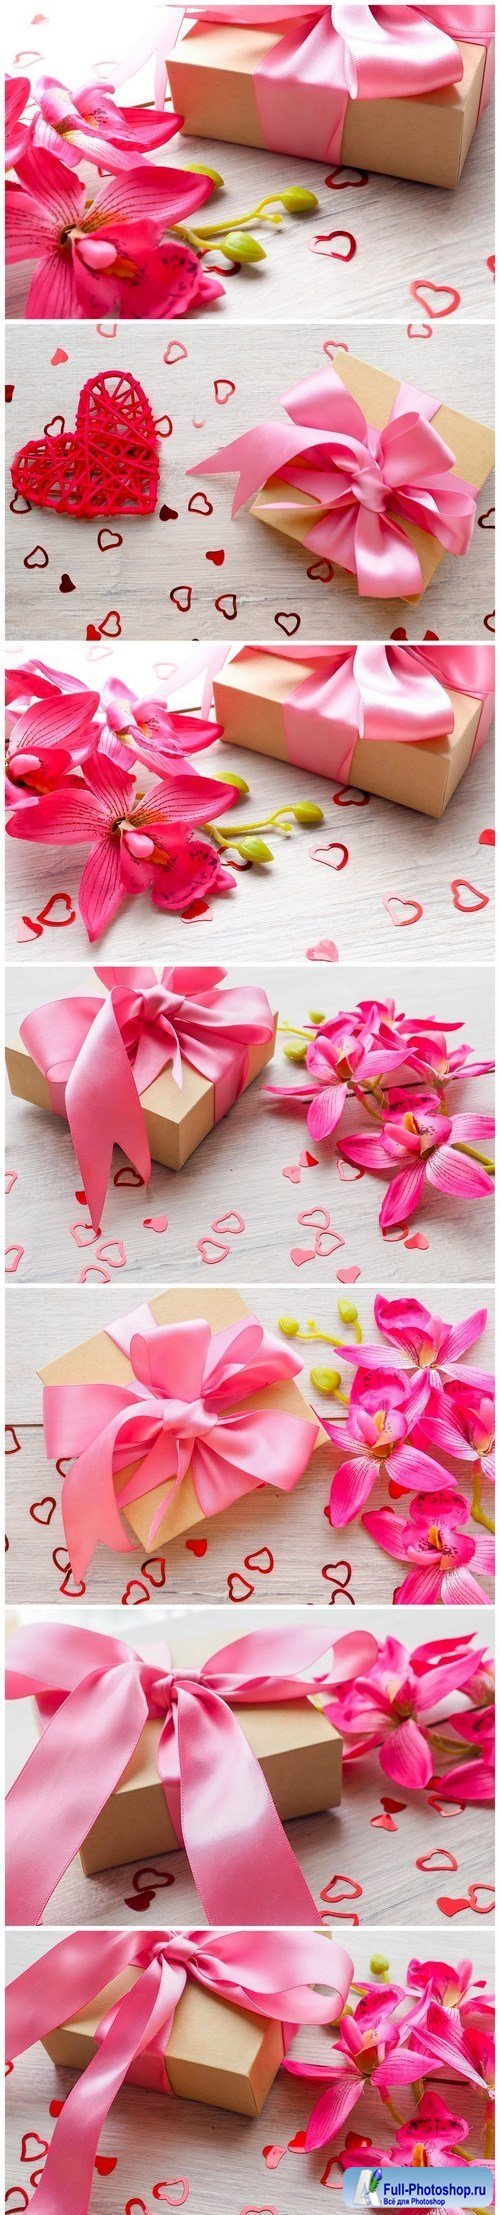 Gentle sweet composition for Valentines day, birthday, wedding in pink and red colors